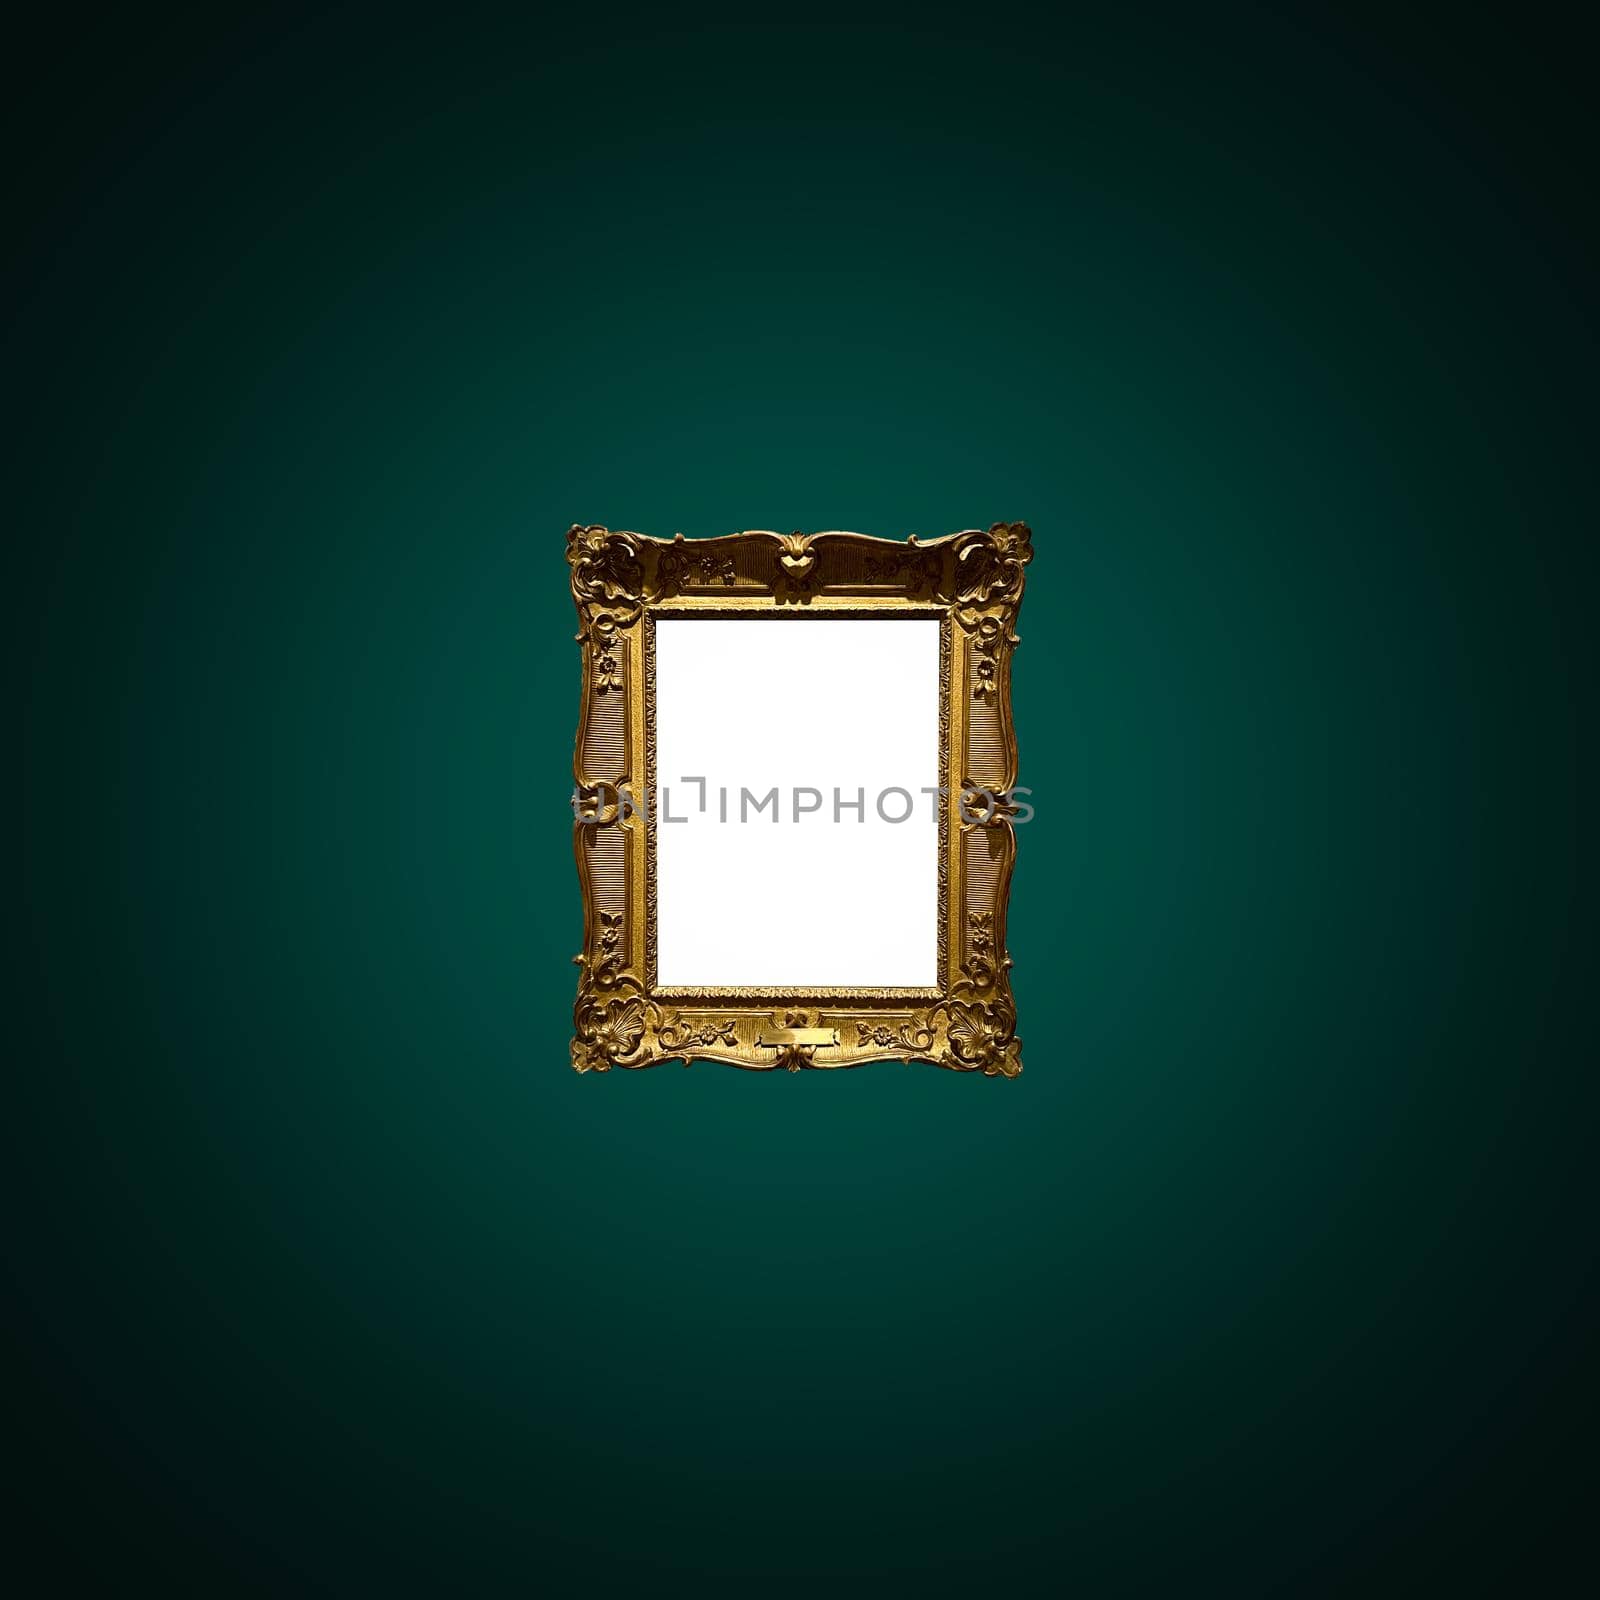 Antique art fair gallery frame on royal green wall at auction house or museum exhibition, blank template with empty white copyspace for mockup design, artwork by Anneleven